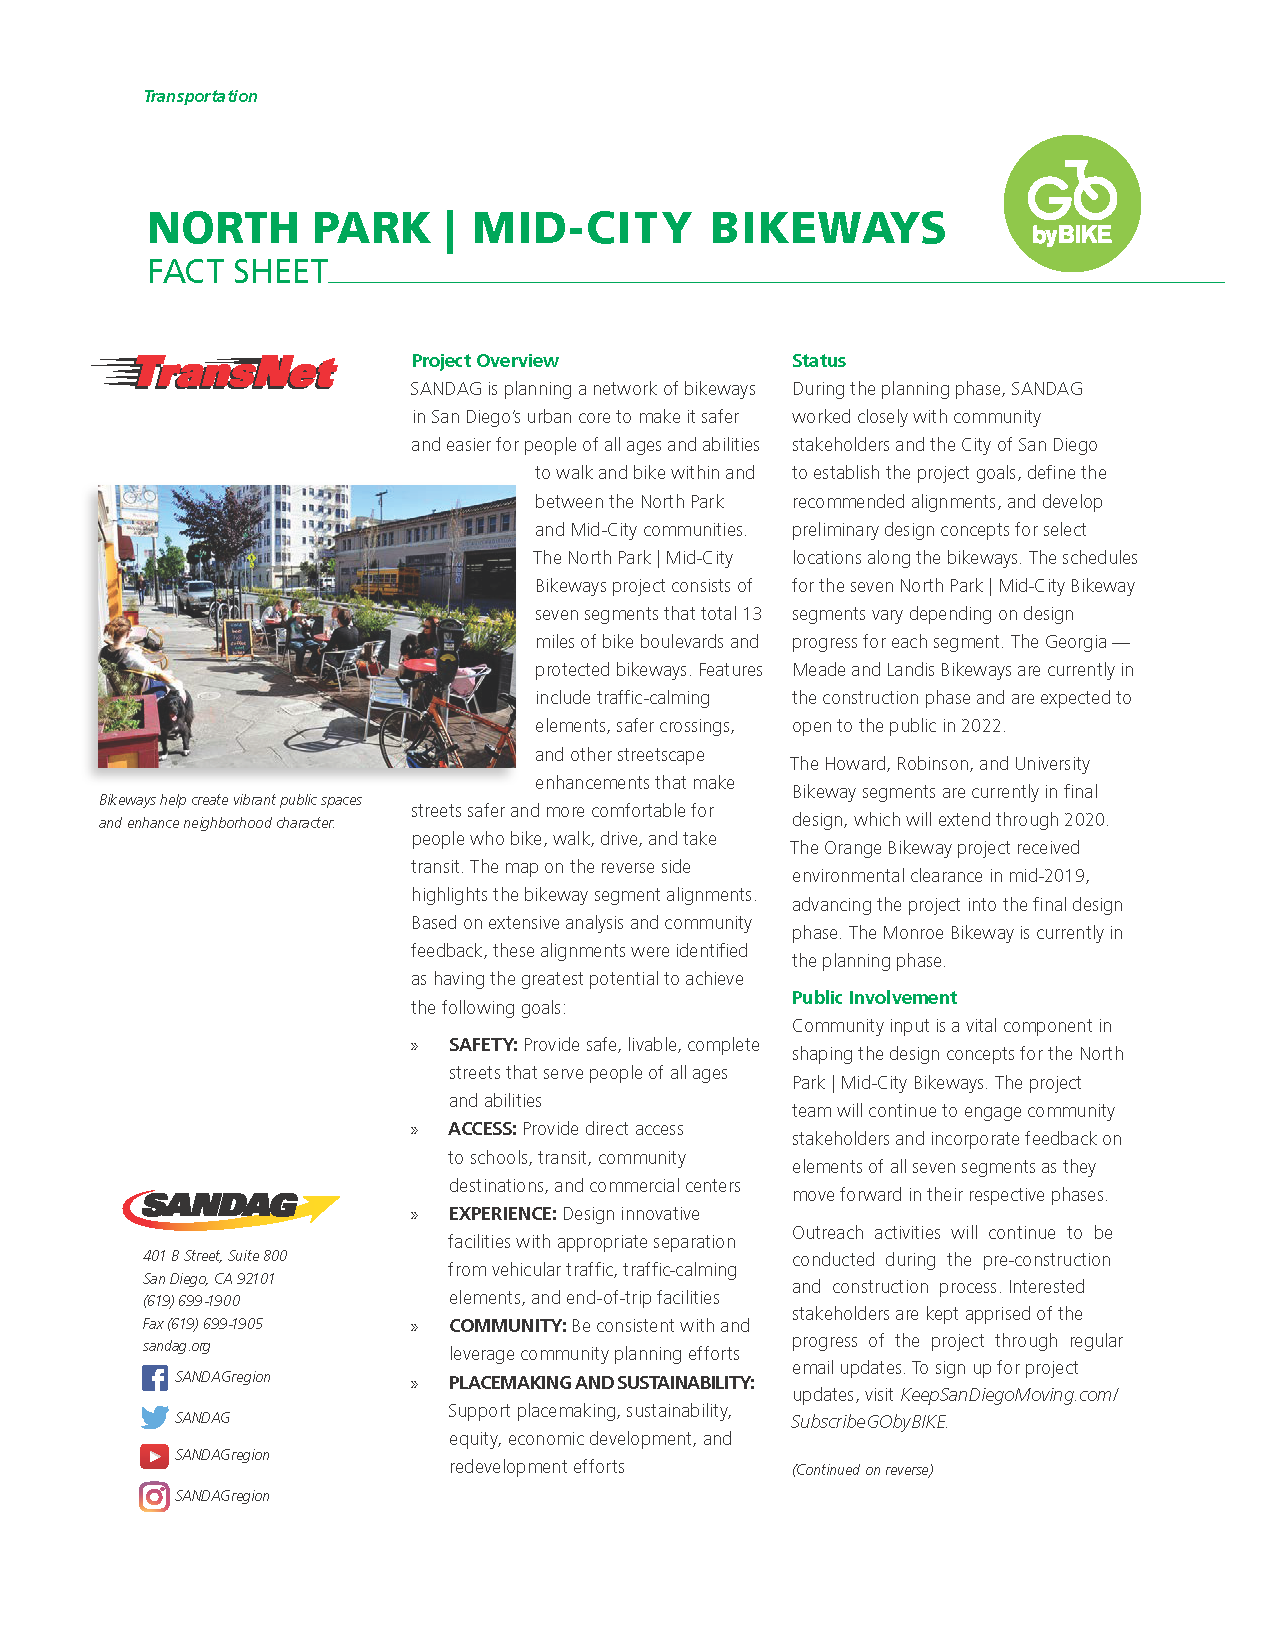 View the North Park Mid-City Bikeways project fact sheet in English